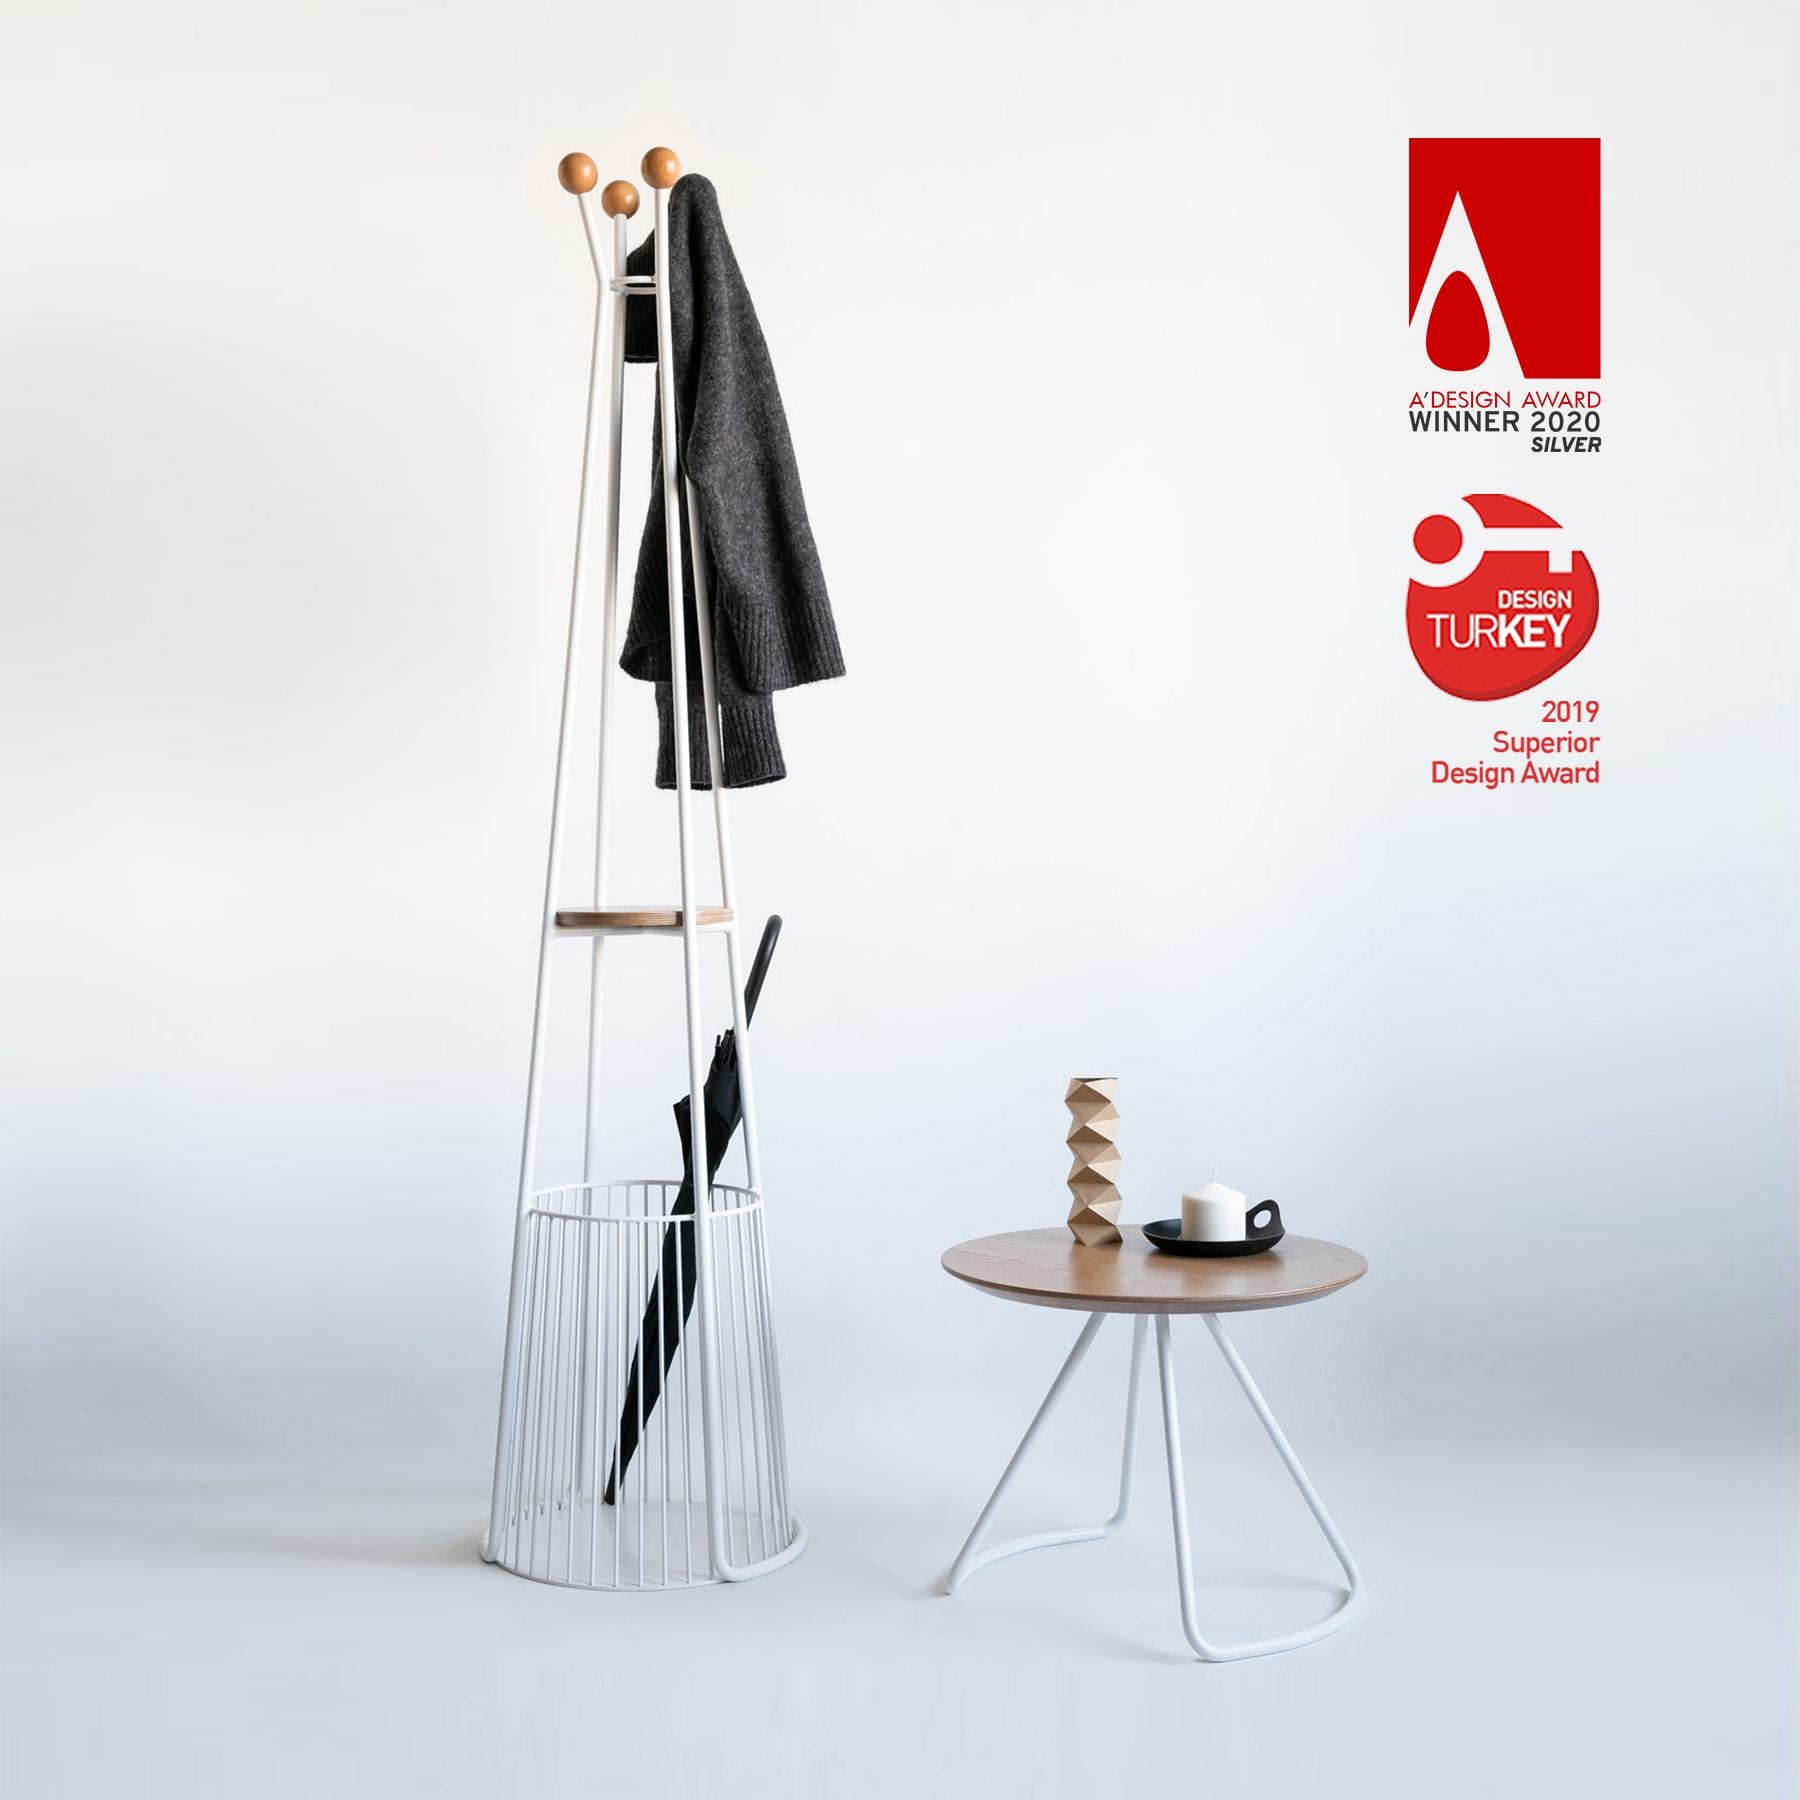 Sama coat rack is part of the Sama collection, which provides functionality through simple, yet striking and sculptural forms that add a unique and elegant touch to its environment.

Inspired by the poetry of whirling costumes worn in Sama